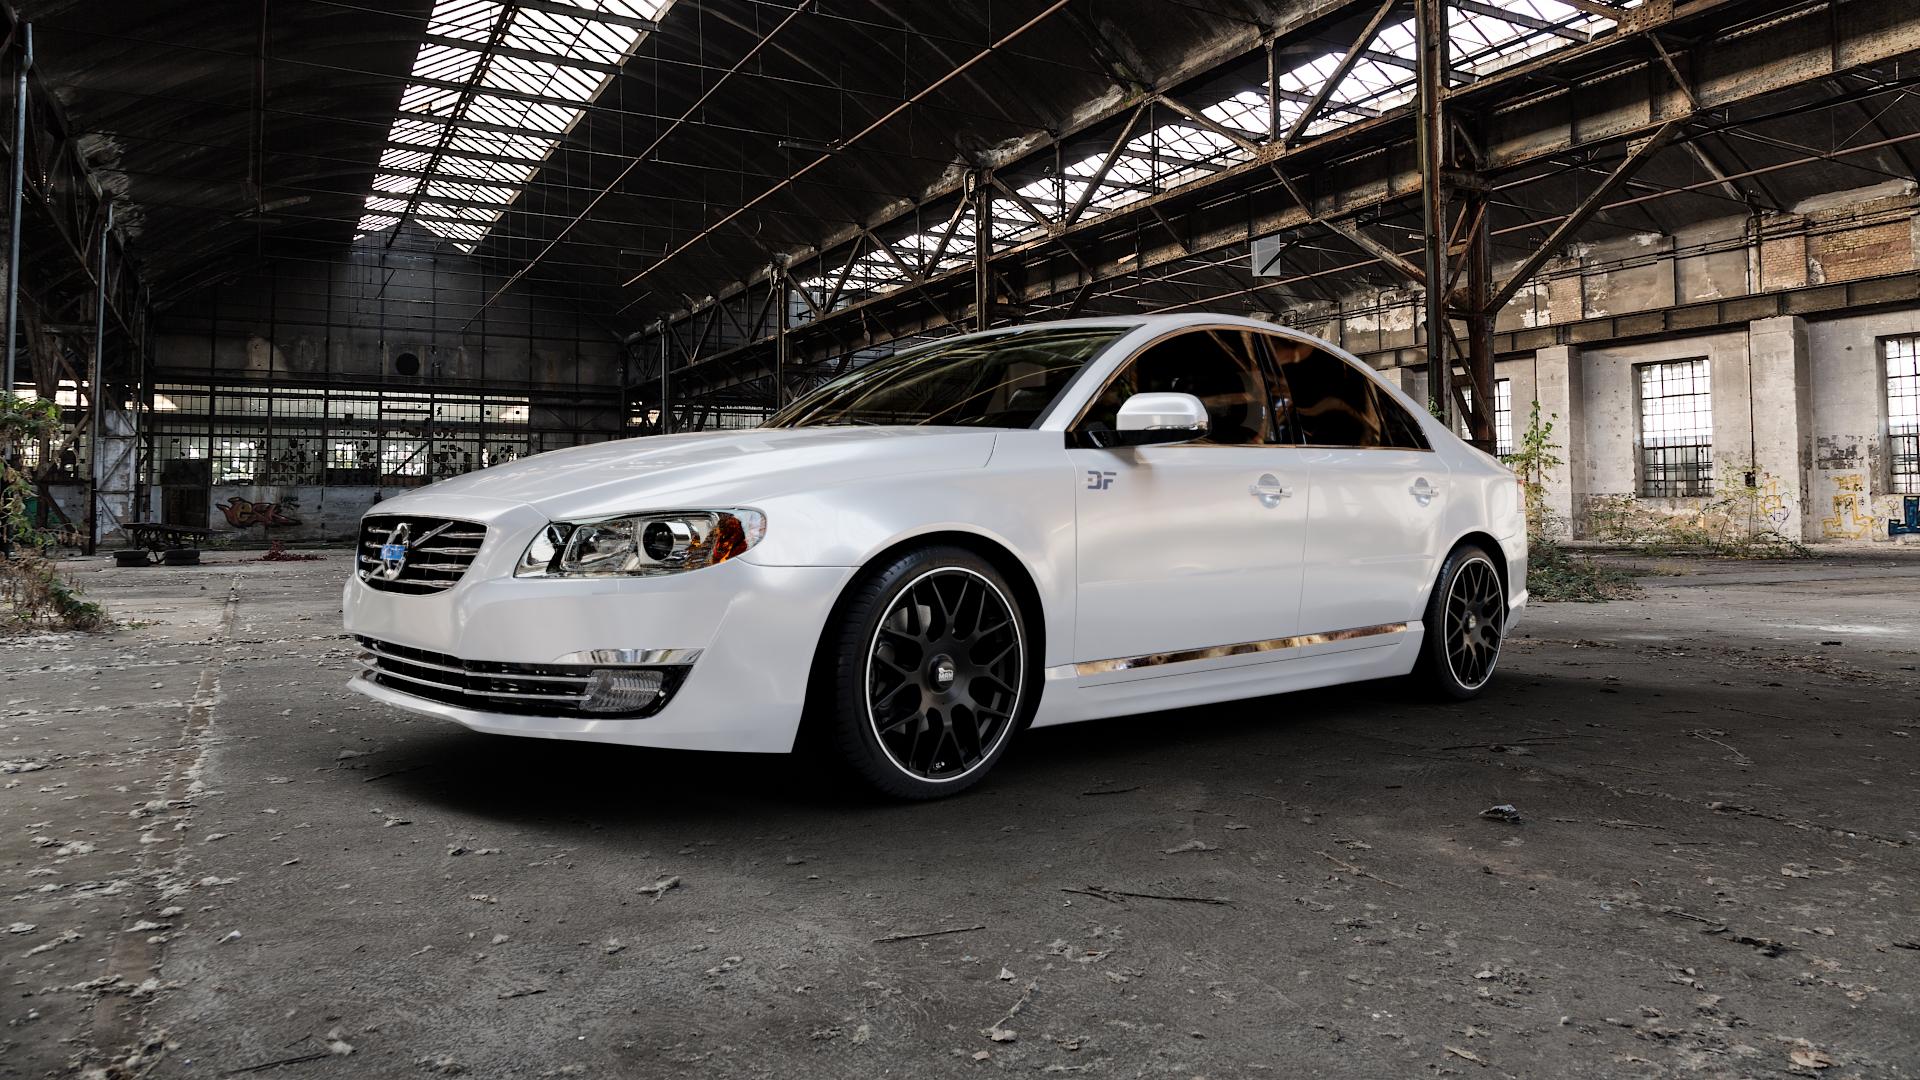 Volvo S80 II Type A 4,4l AWD 232kW (315 hp) Wheels and Tyre Packages